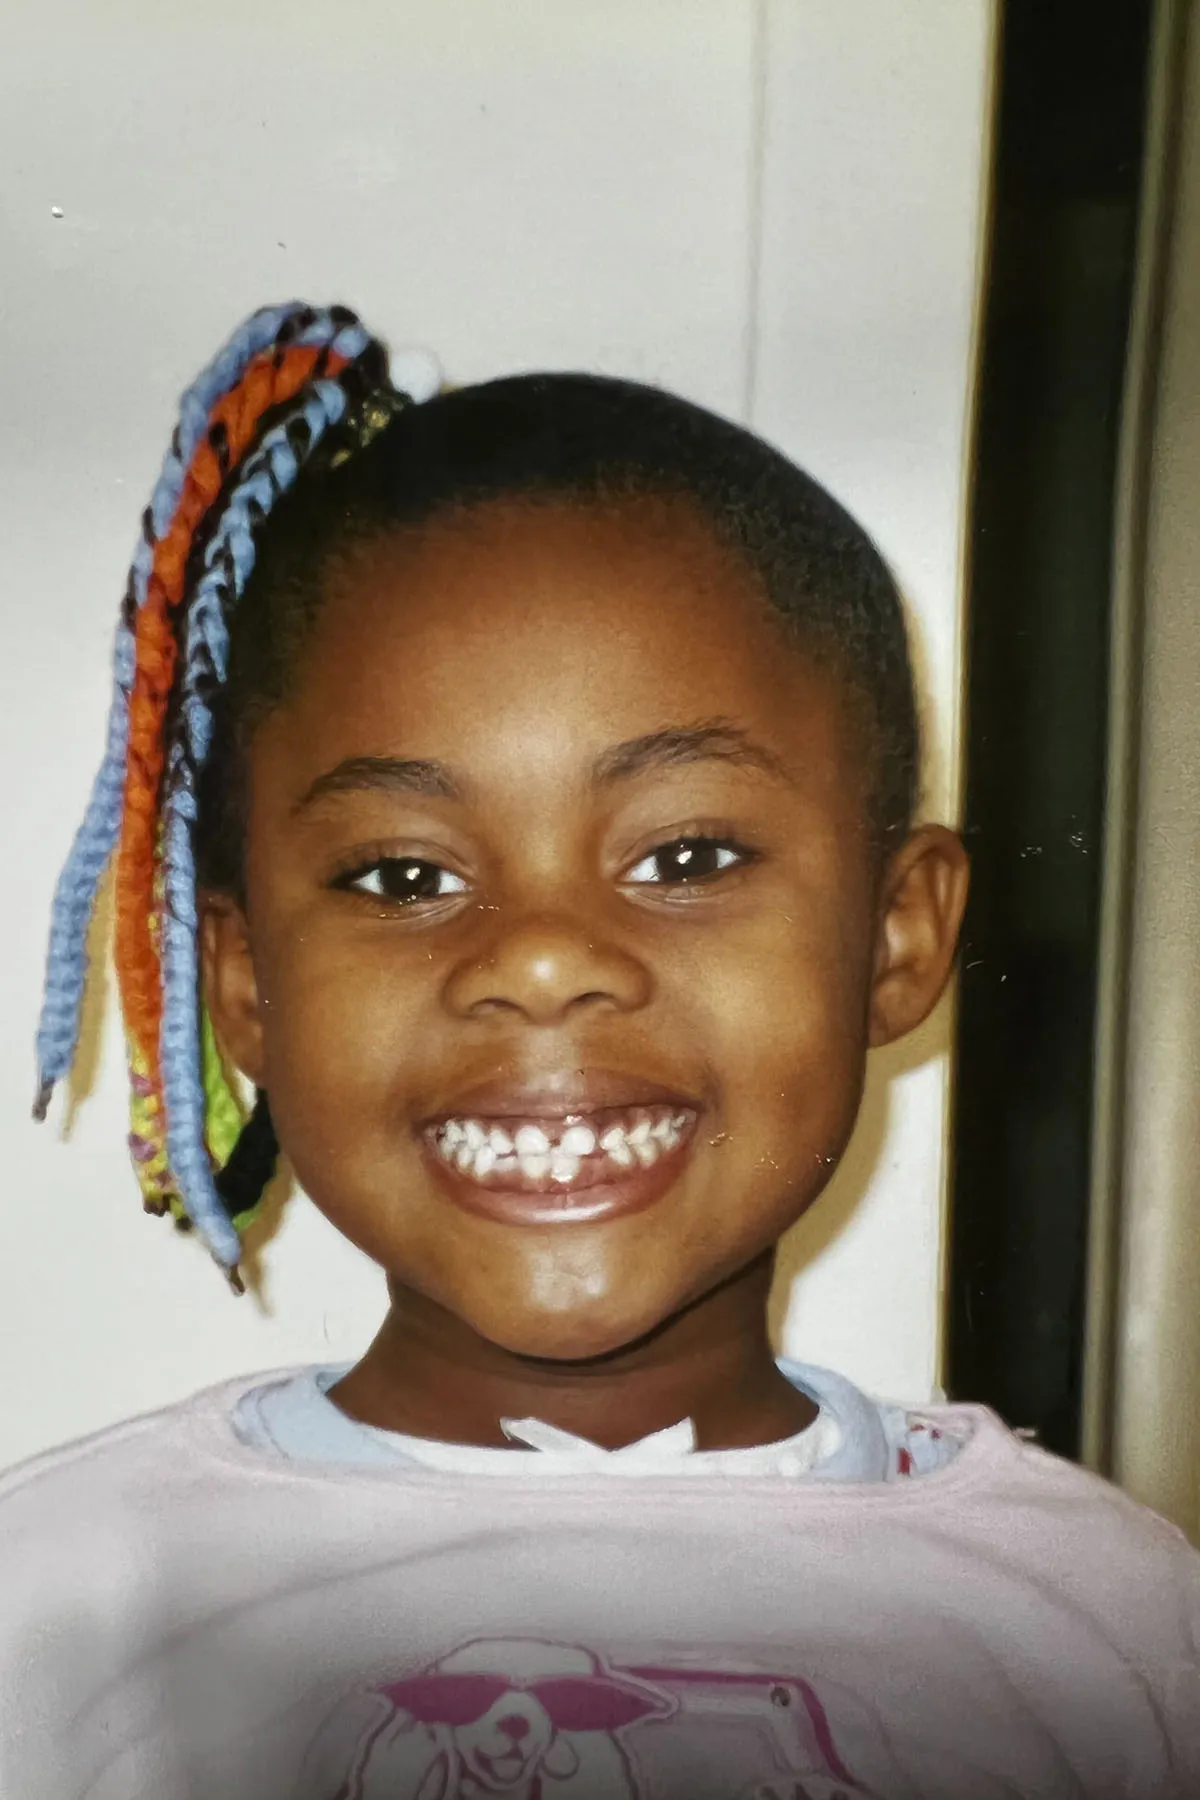 A 7-year-old Bria Herbert smiles as she shows off her hairstyle for "crazy hair day" at school.